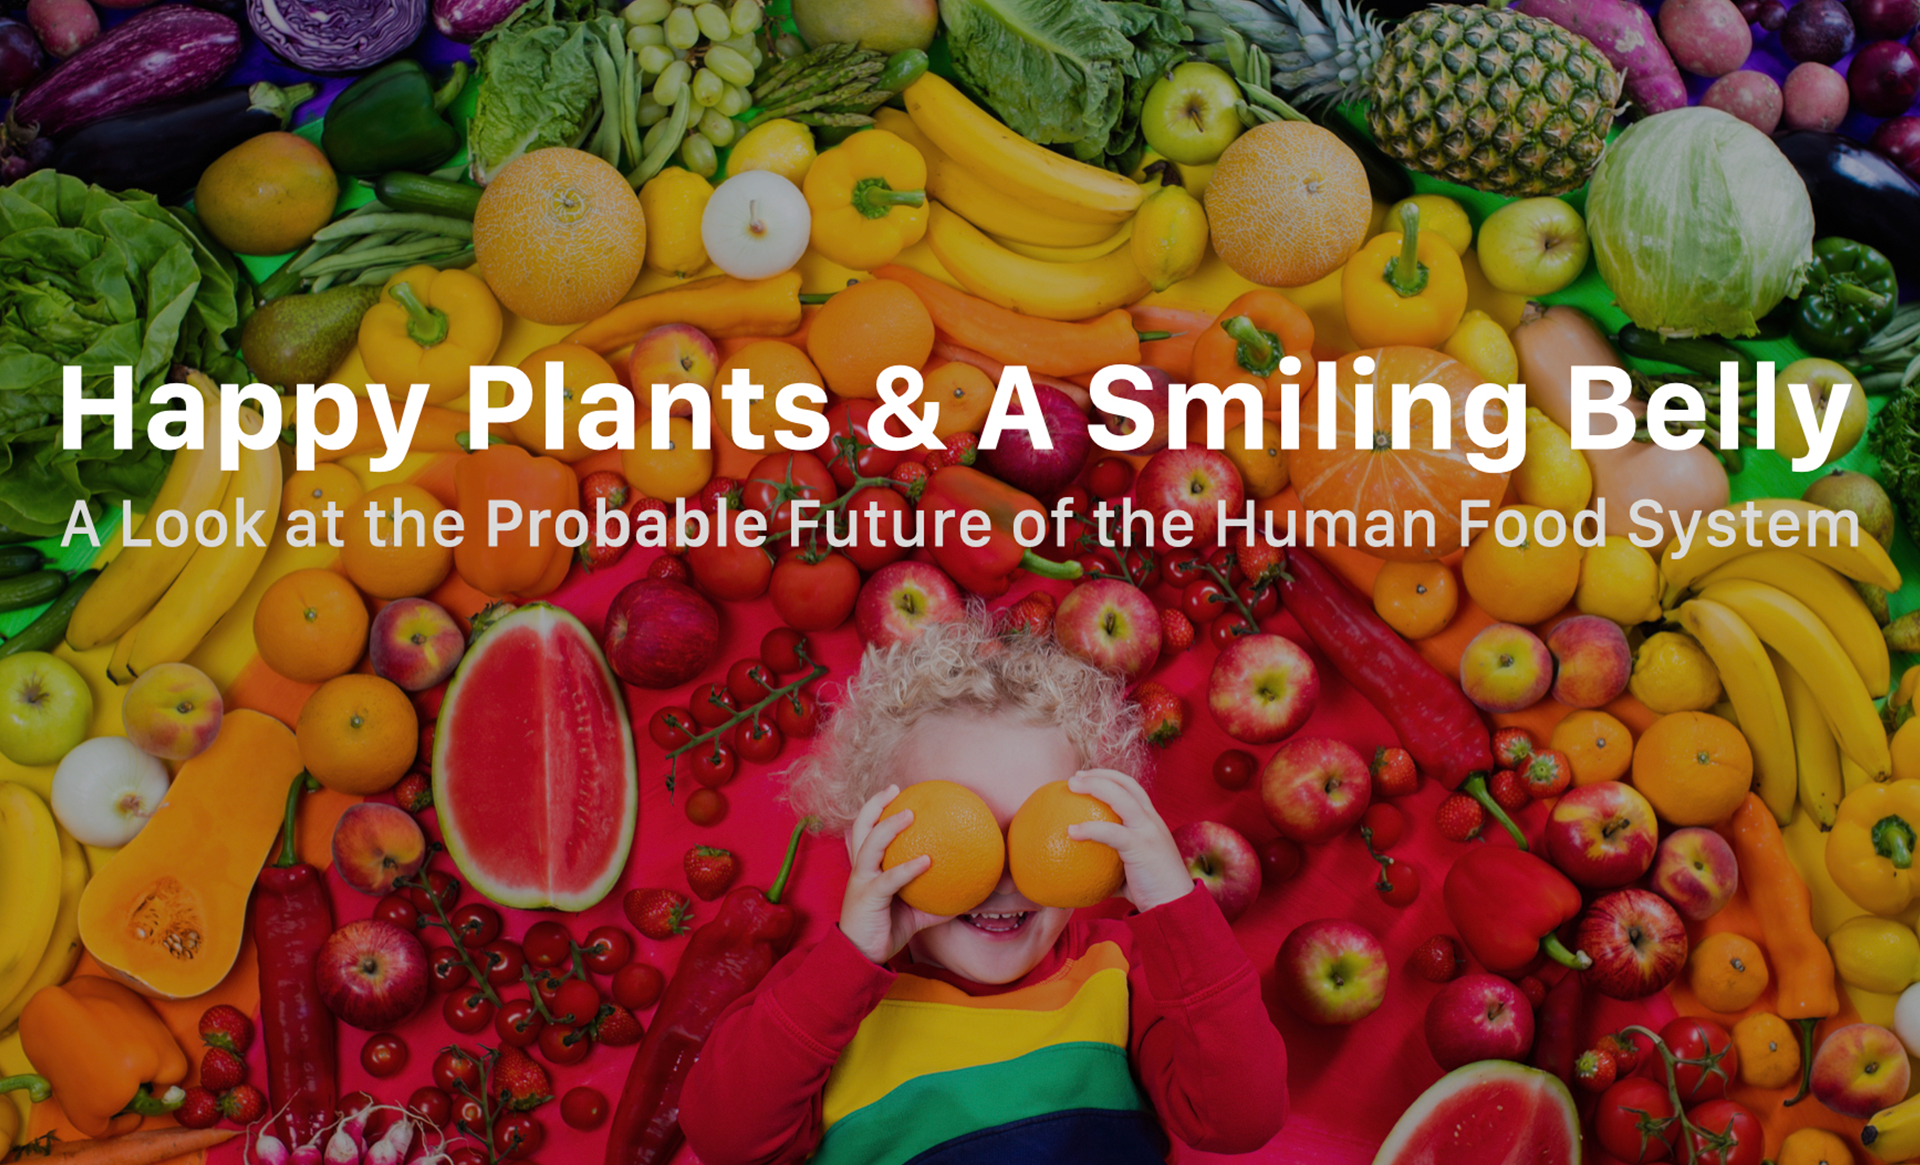 Happy Plants & A Smiling Belly